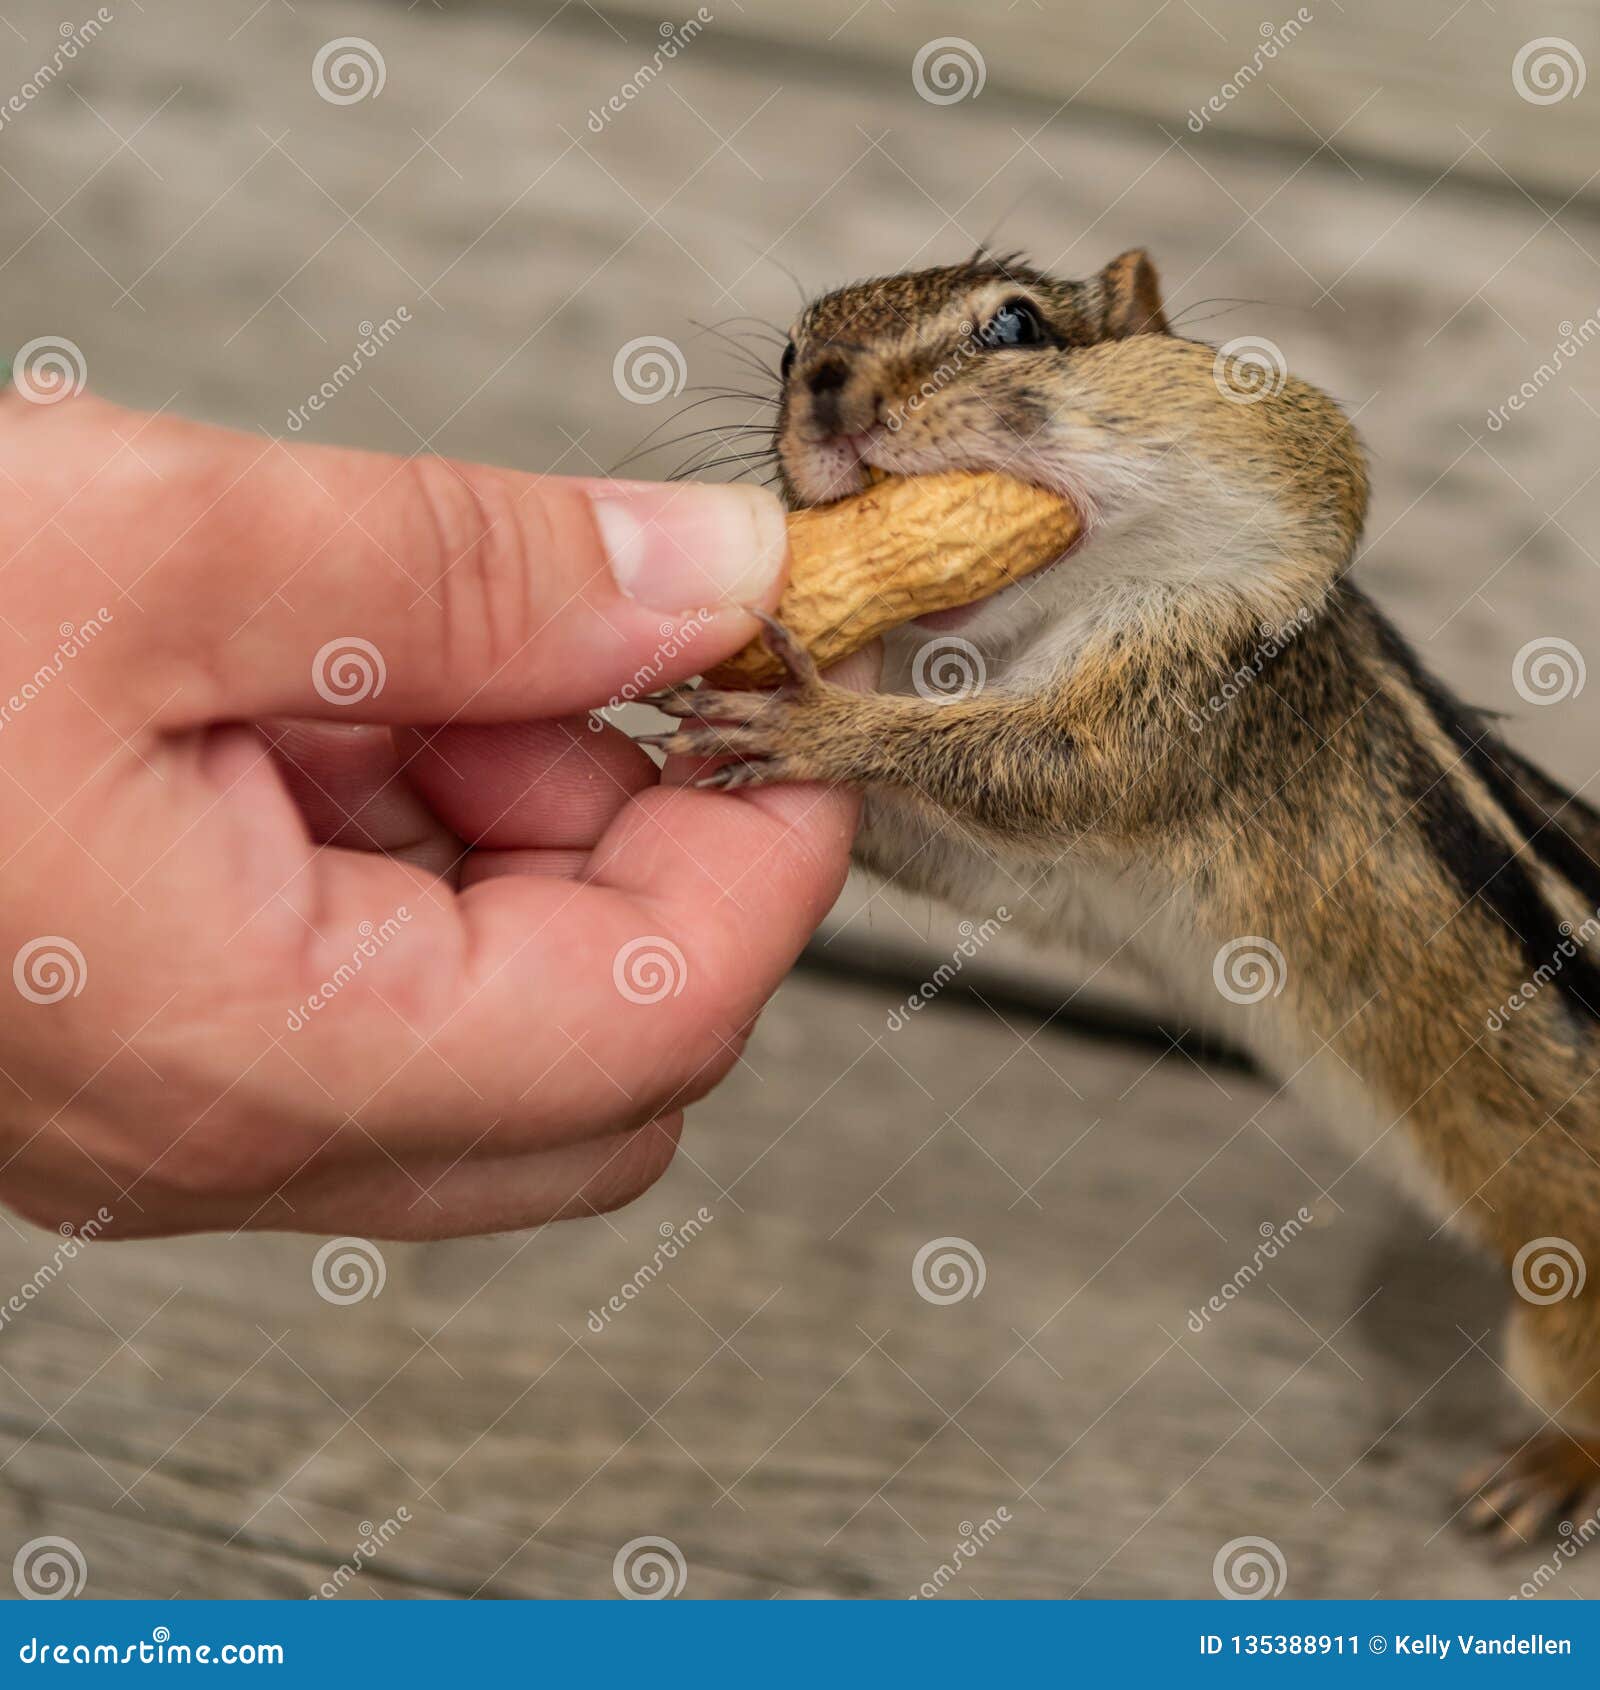 Albums 90+ Images is it safe to feed chipmunks by hand Latest